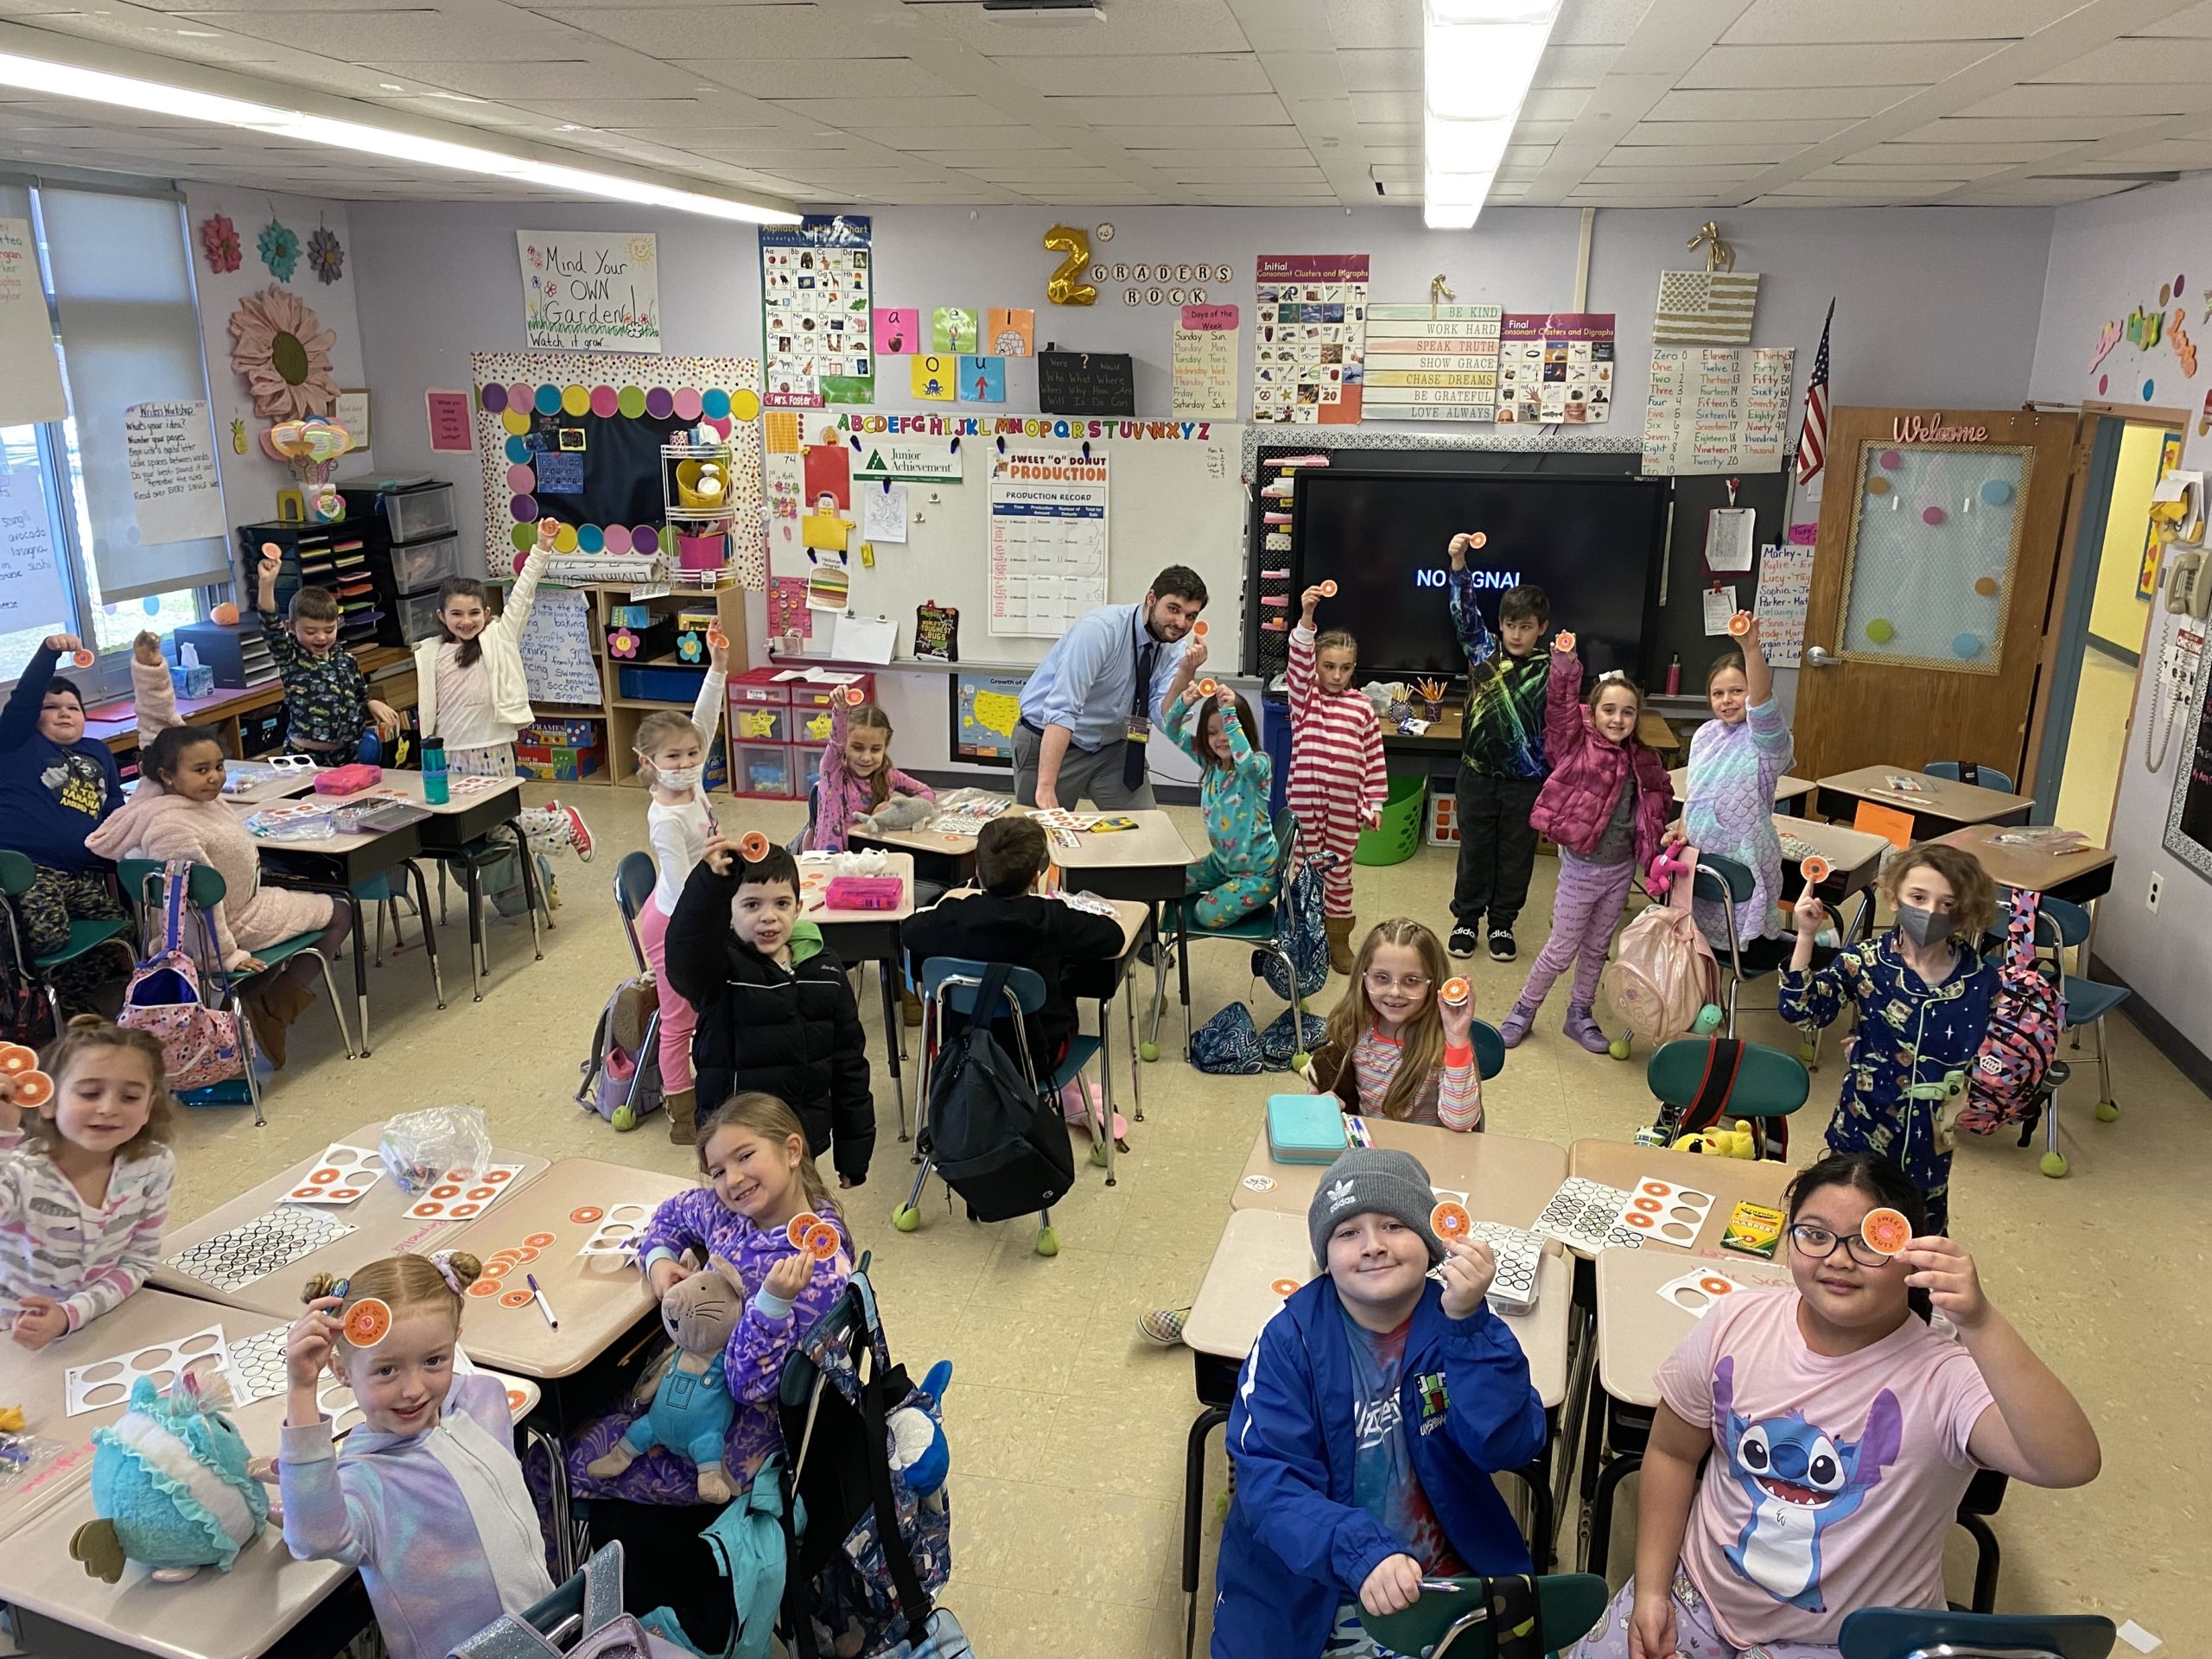 Hampton Bays Elementary School students are participating in the Junior Achievement program, where they are learning about economics, job skills, civic responsibilities and money management.